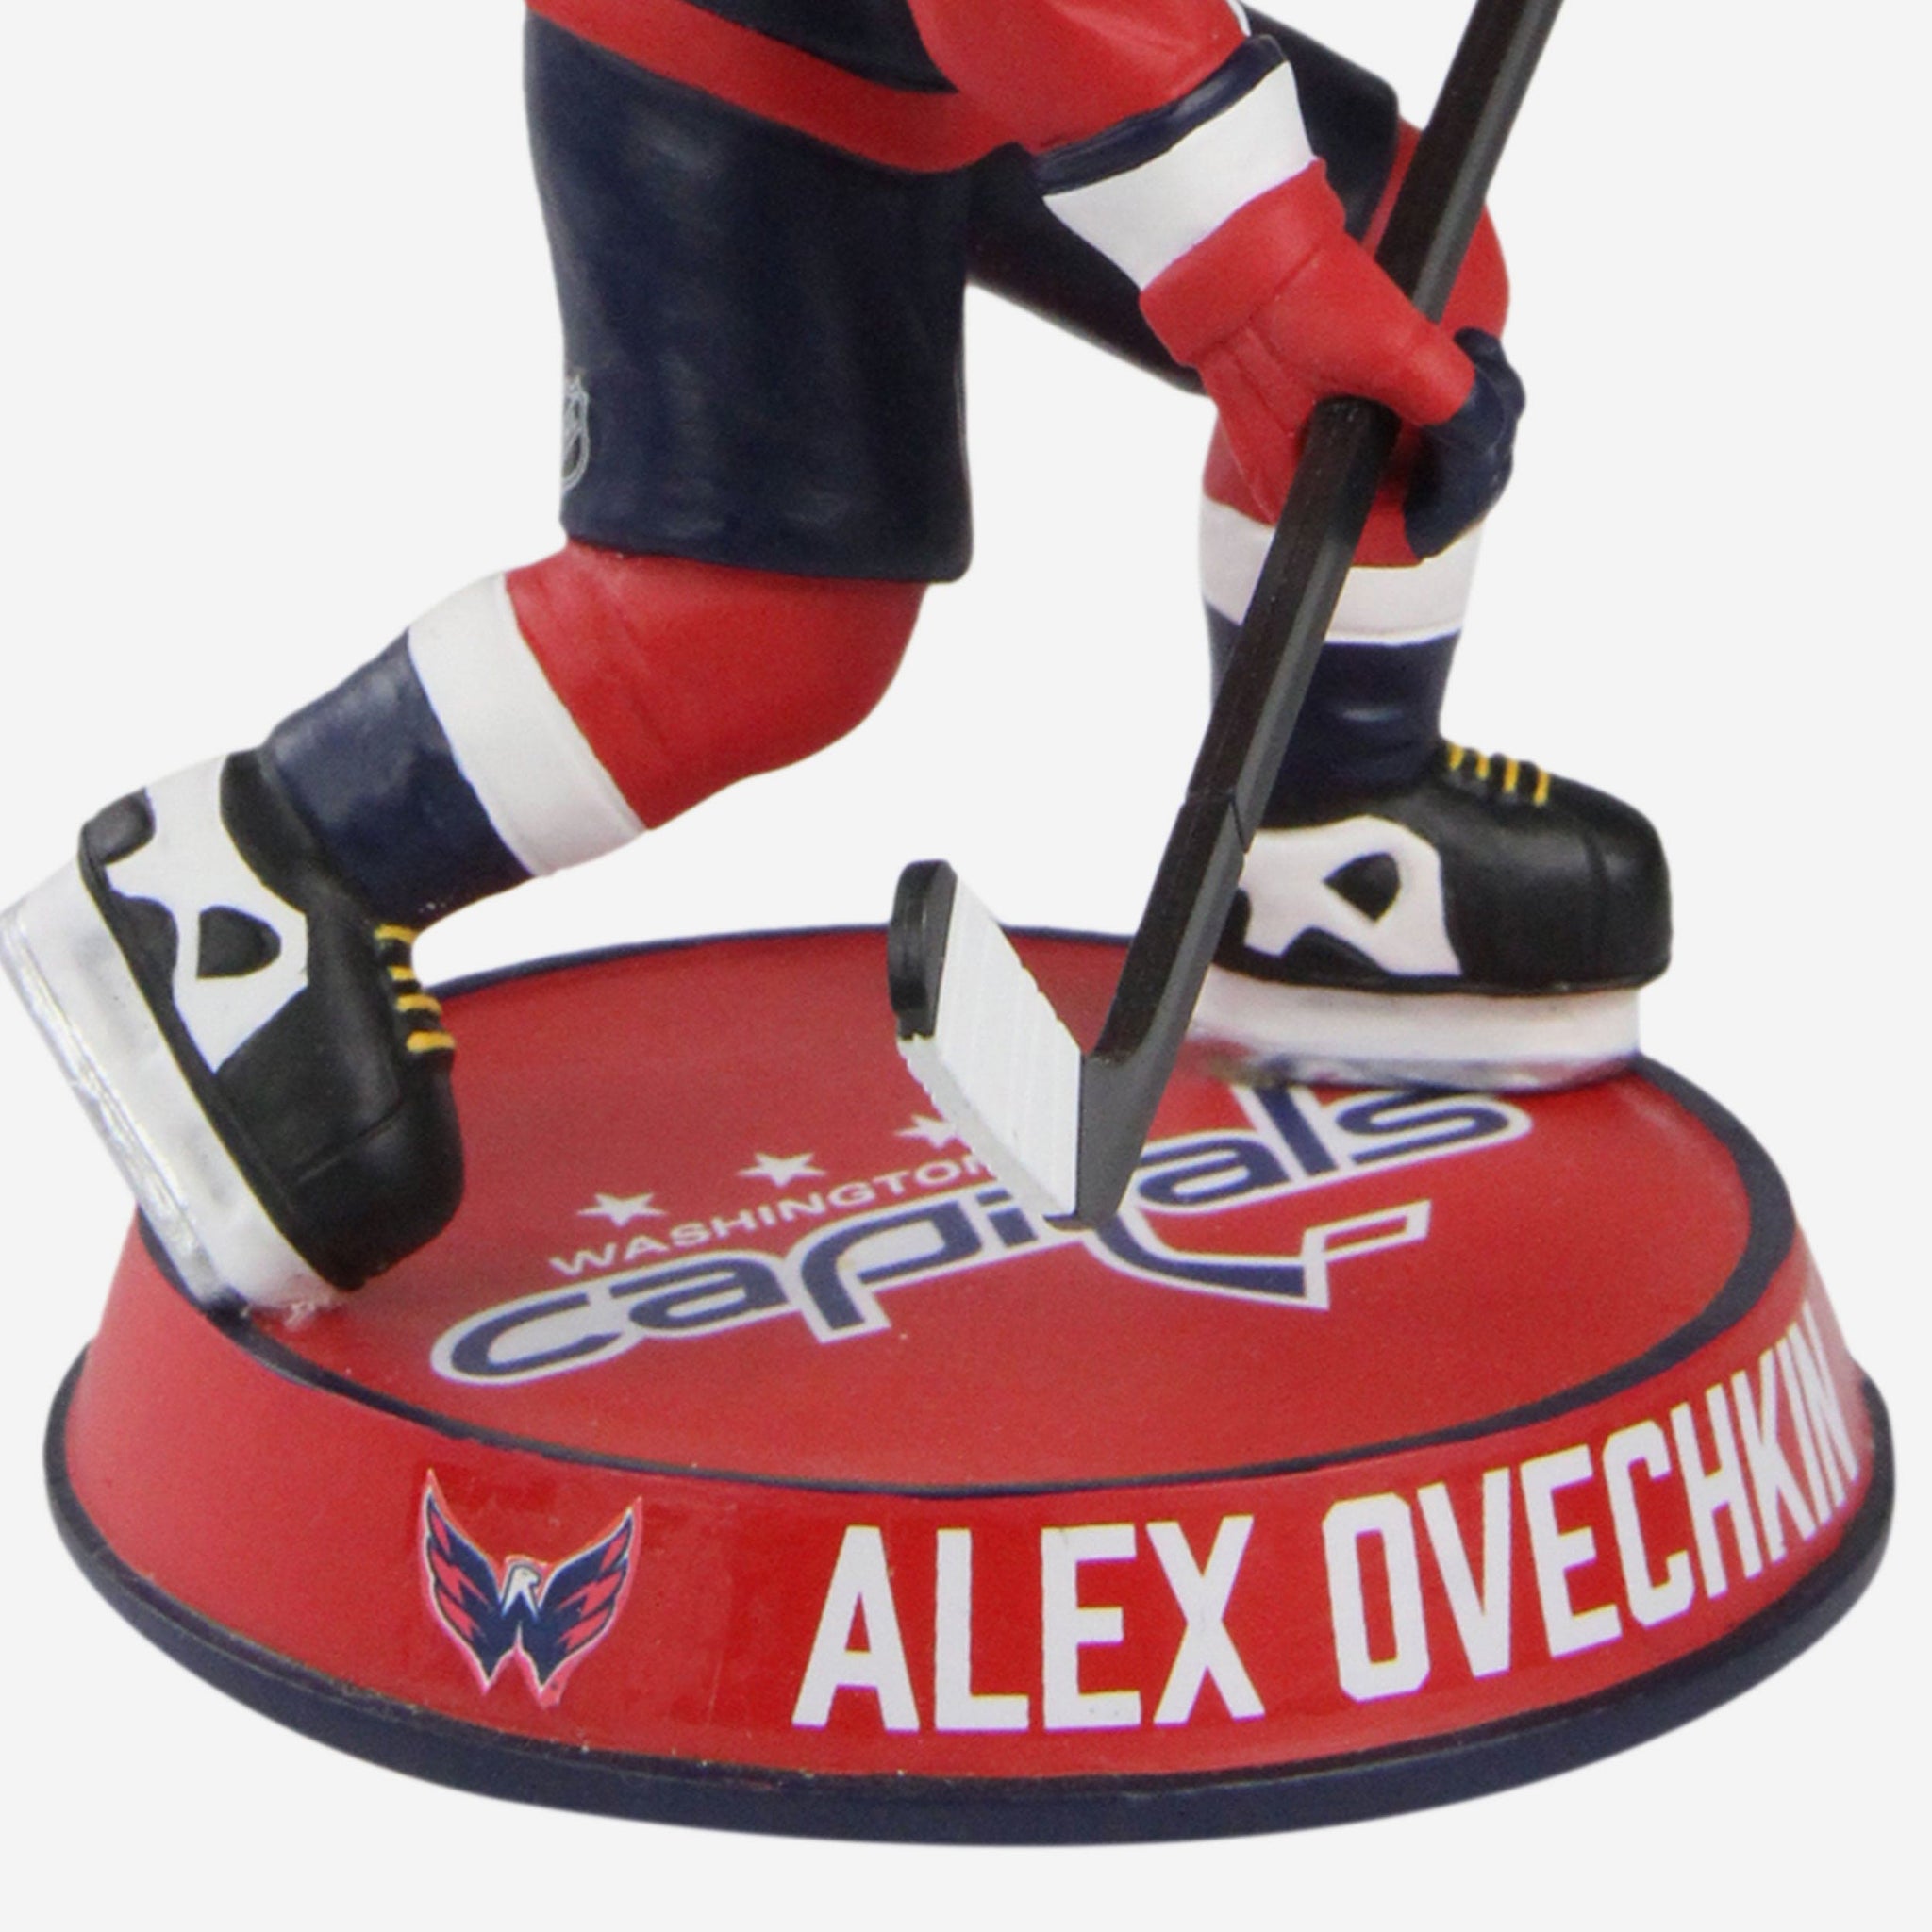 Alex Ovechkin Signed Capitals Hockey Puck With Display Case